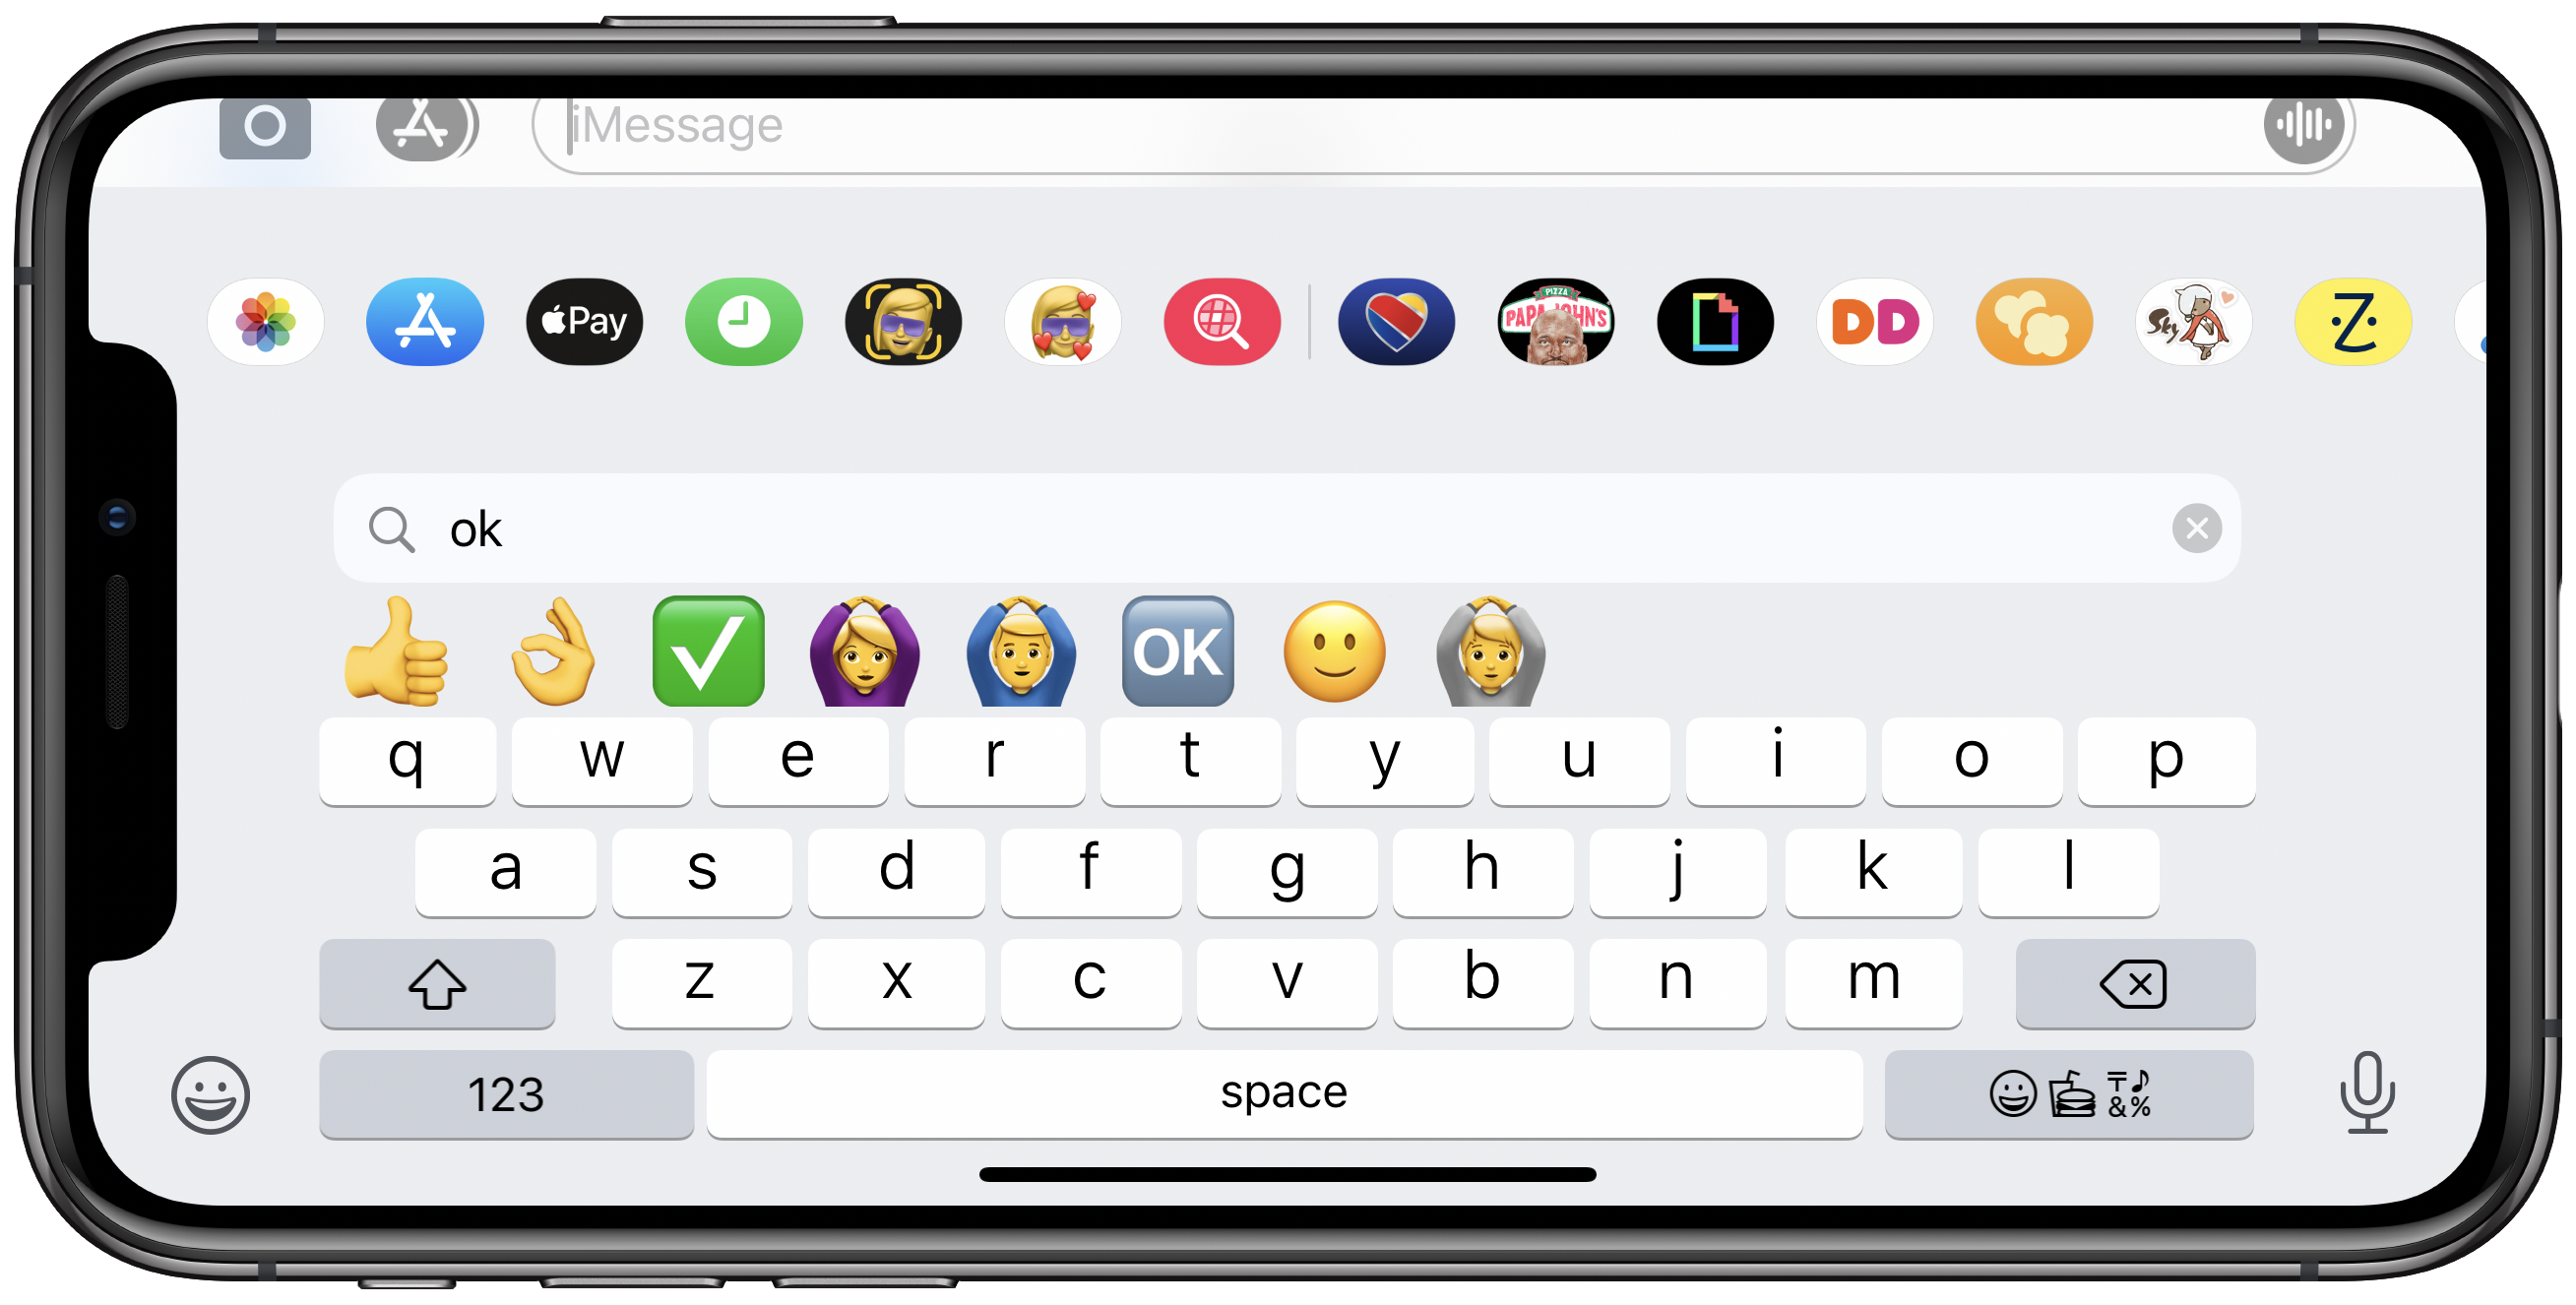 Emoji search is here at last.